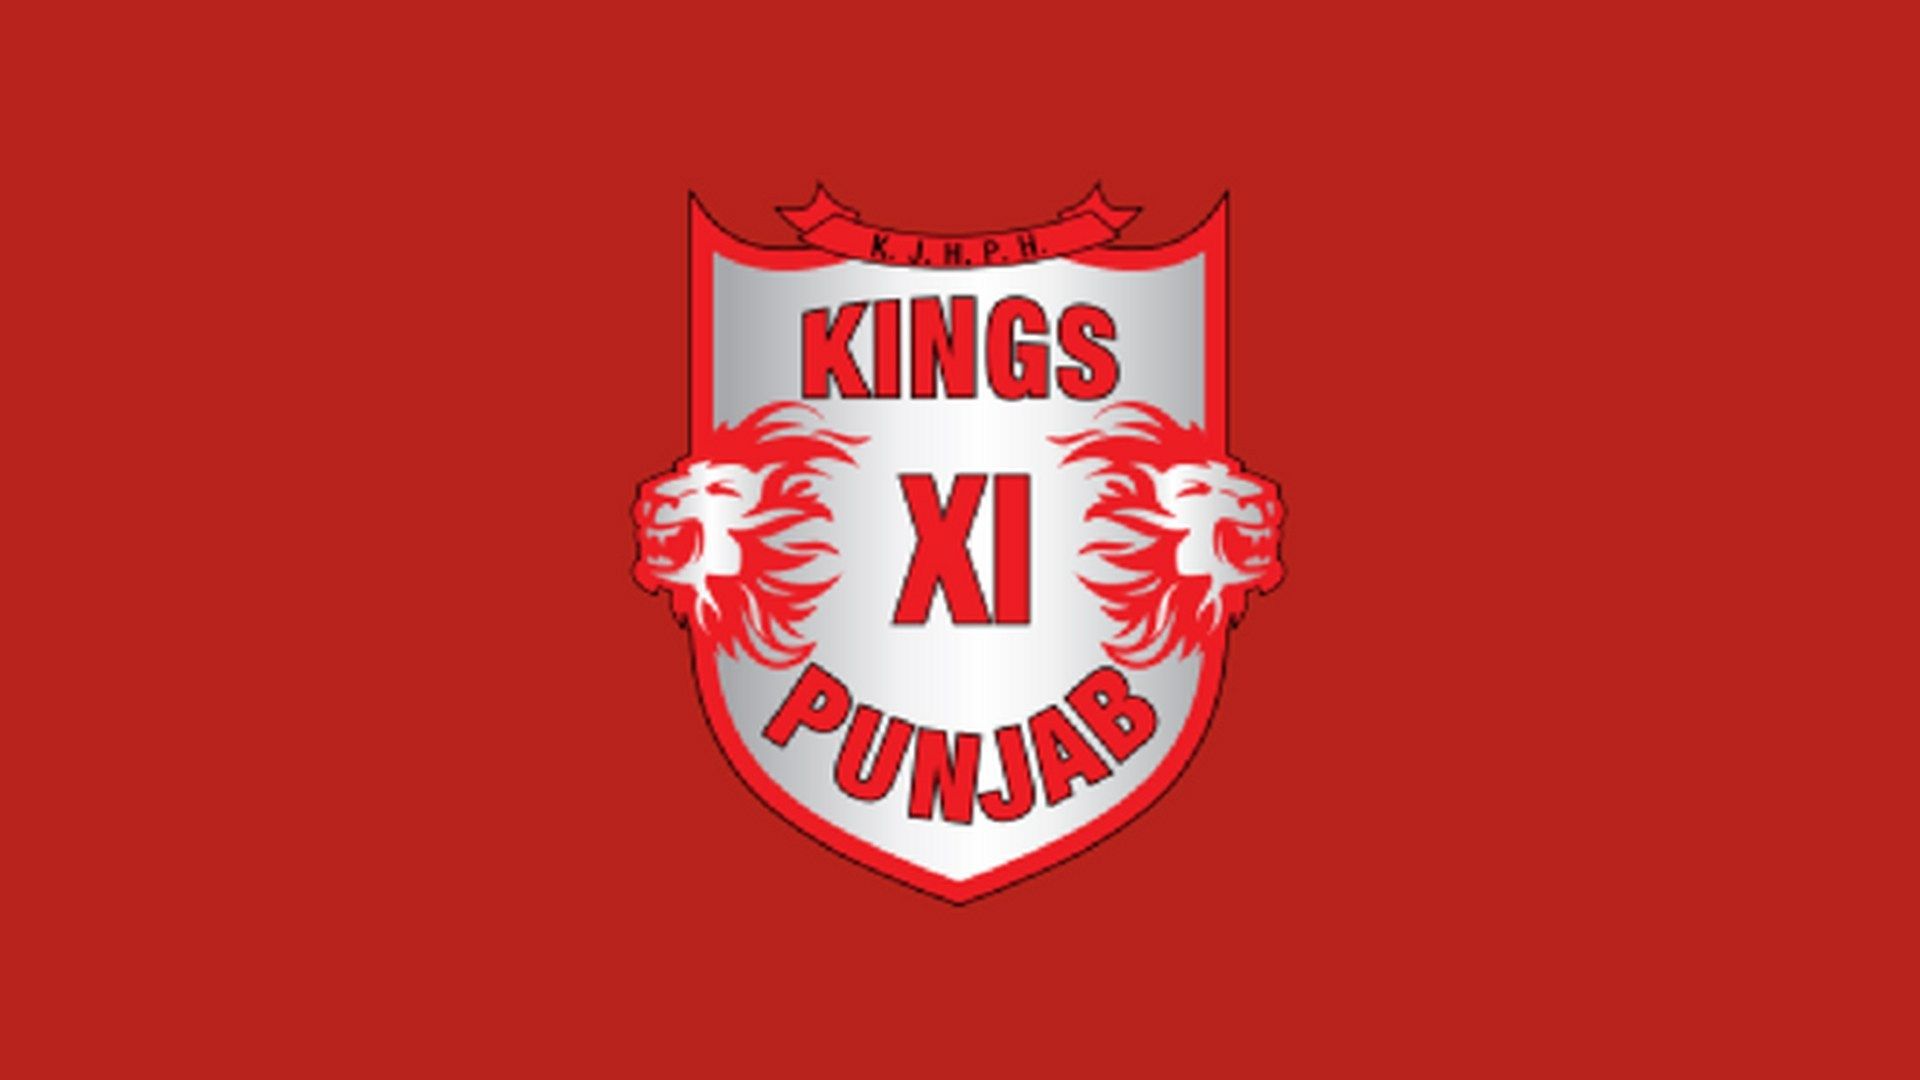 Free download KXIP Logo HD Wallpaper 2019 Kings XI Punjab Events Today [1920x1080] for your Desktop, Mobile & Tablet. Explore Kings XI Punjab Wallpaper. Kings XI Punjab Wallpaper, Punjab